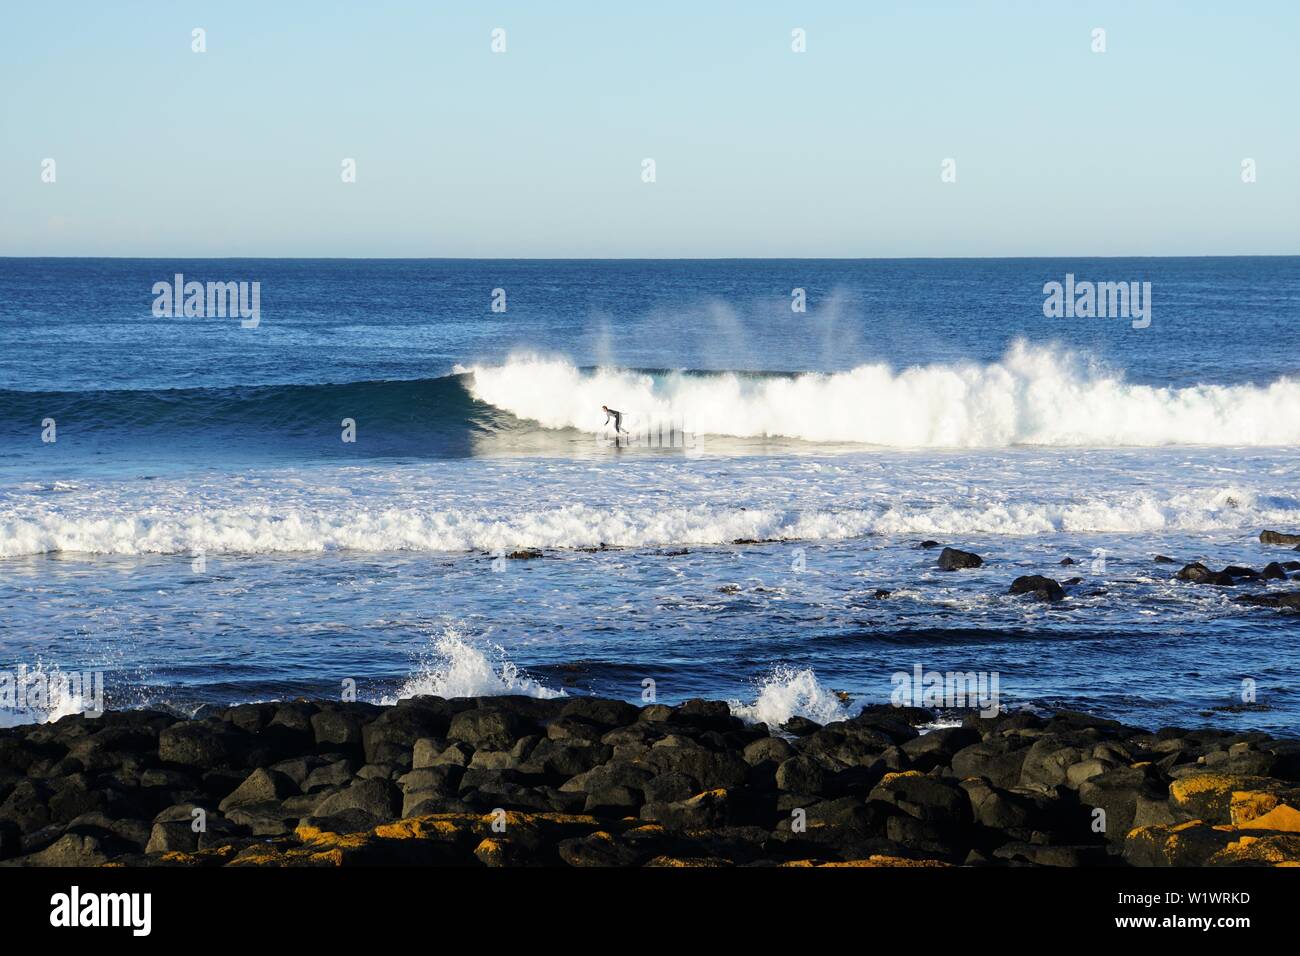 Early Morning Surfer catching a Wave at Port Fairy's Surf Beach Stock Photo